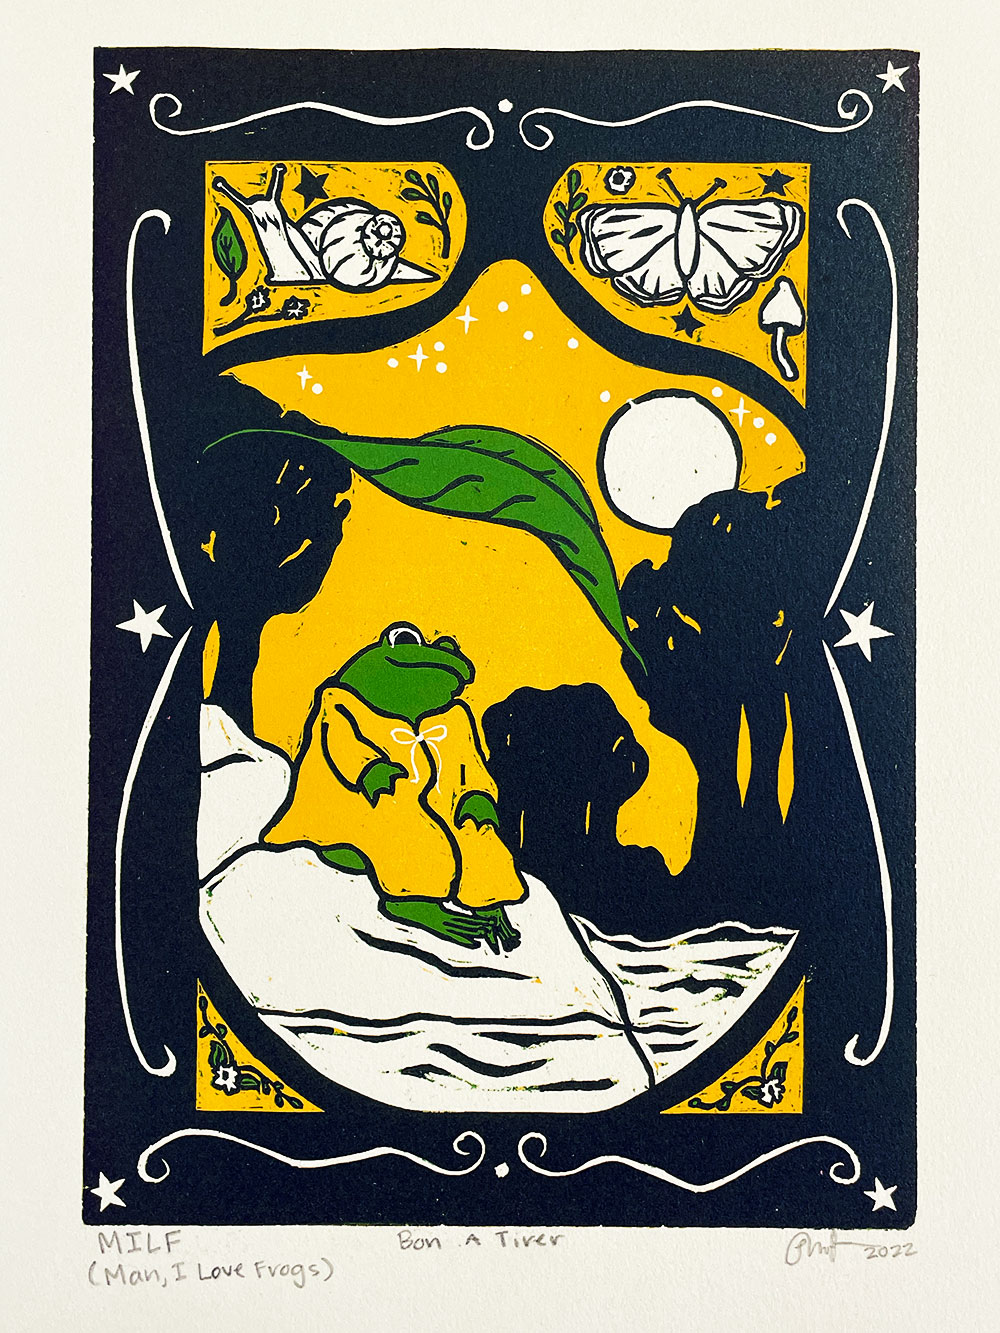 A printed image composed of cartoon frog resting on a rock surrounded by the sea, trees, a butterfly, and snail. Printed using the colors yellow, deep blue, and green.